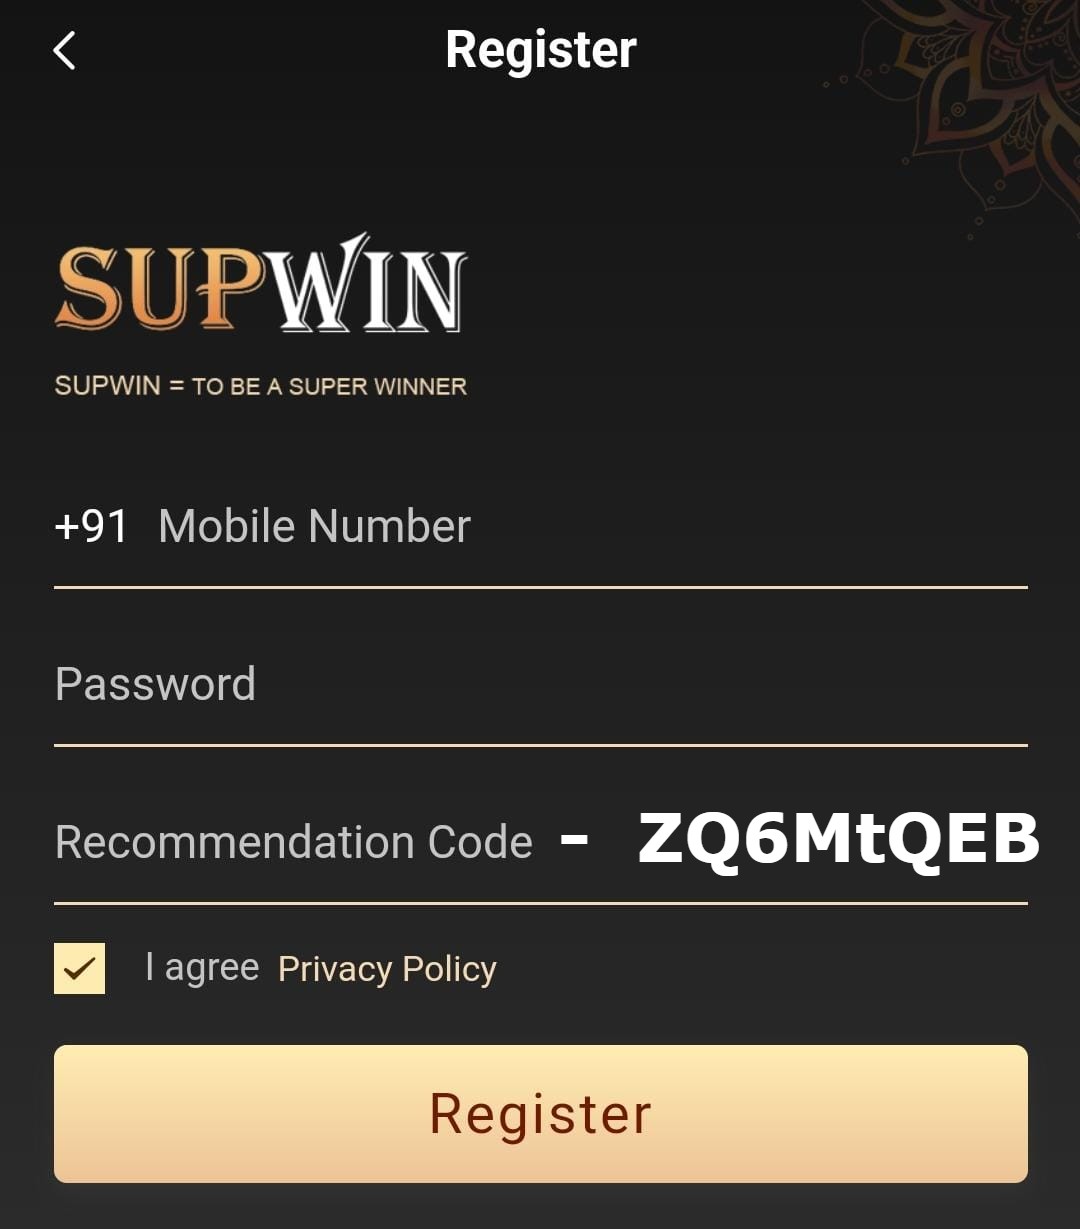 SupWin Recommendation Code